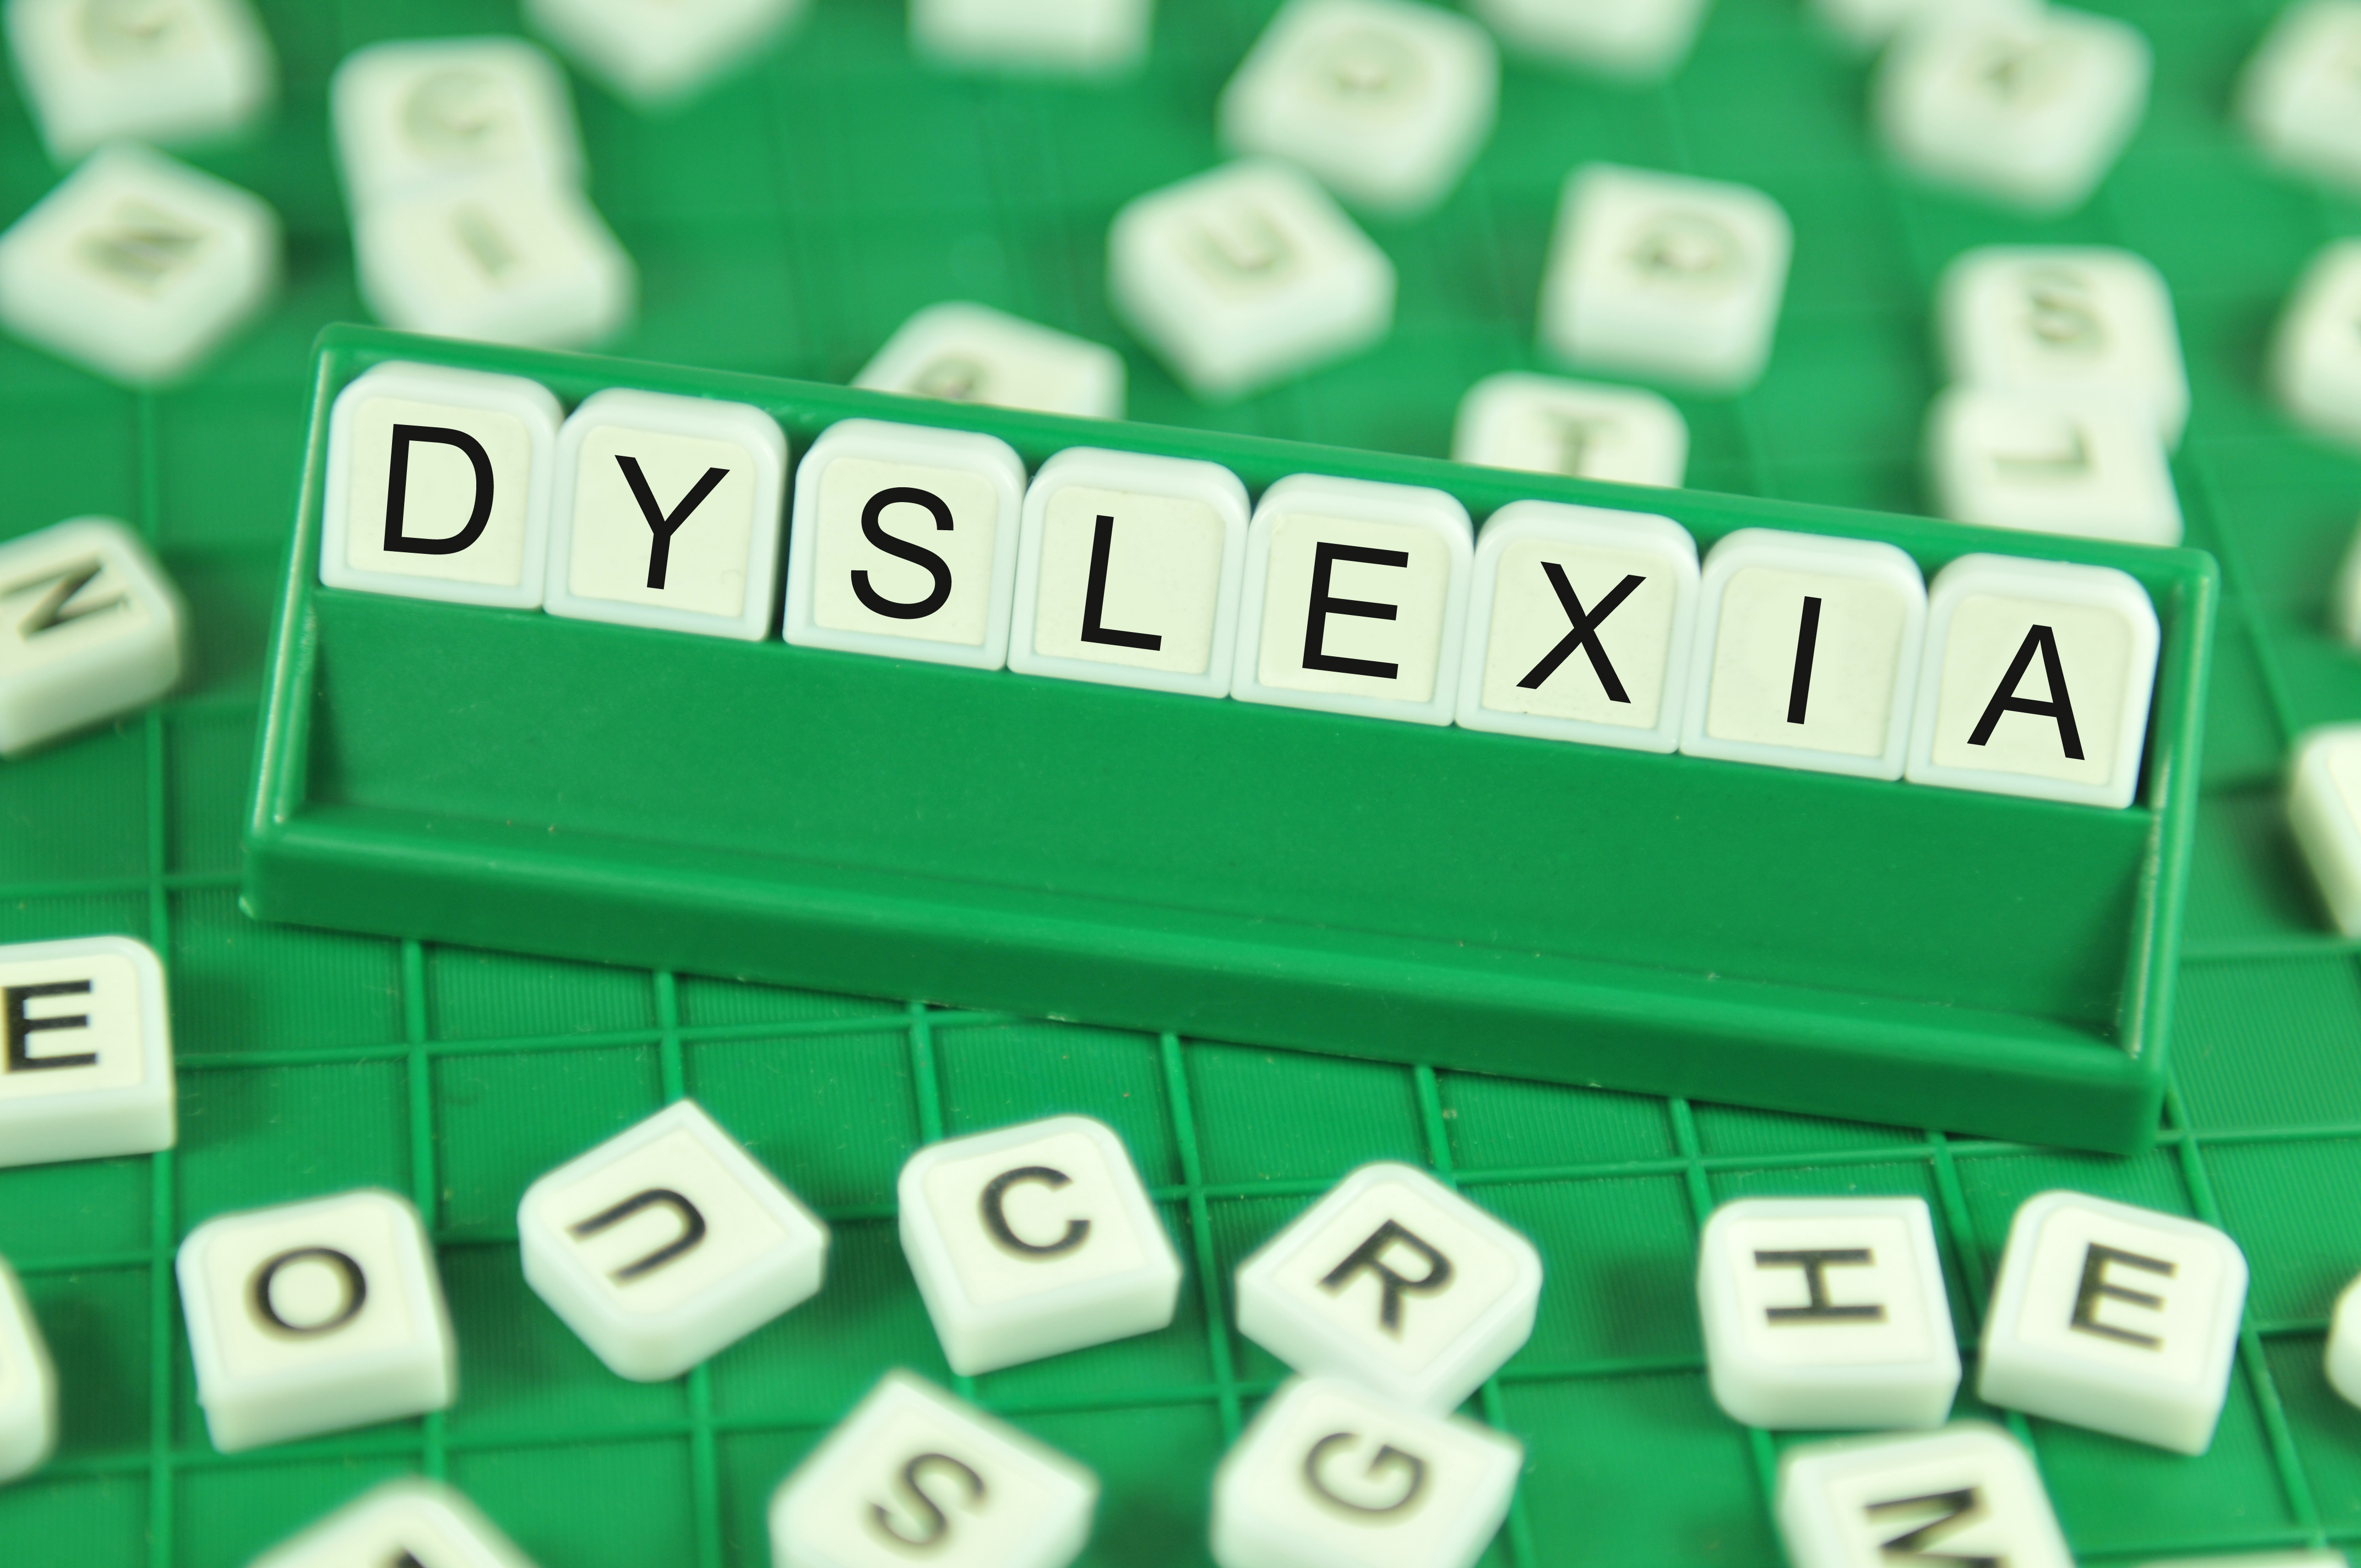 Getting the Word Out: The Challenging Reality for Israel’s Dyslexic Children